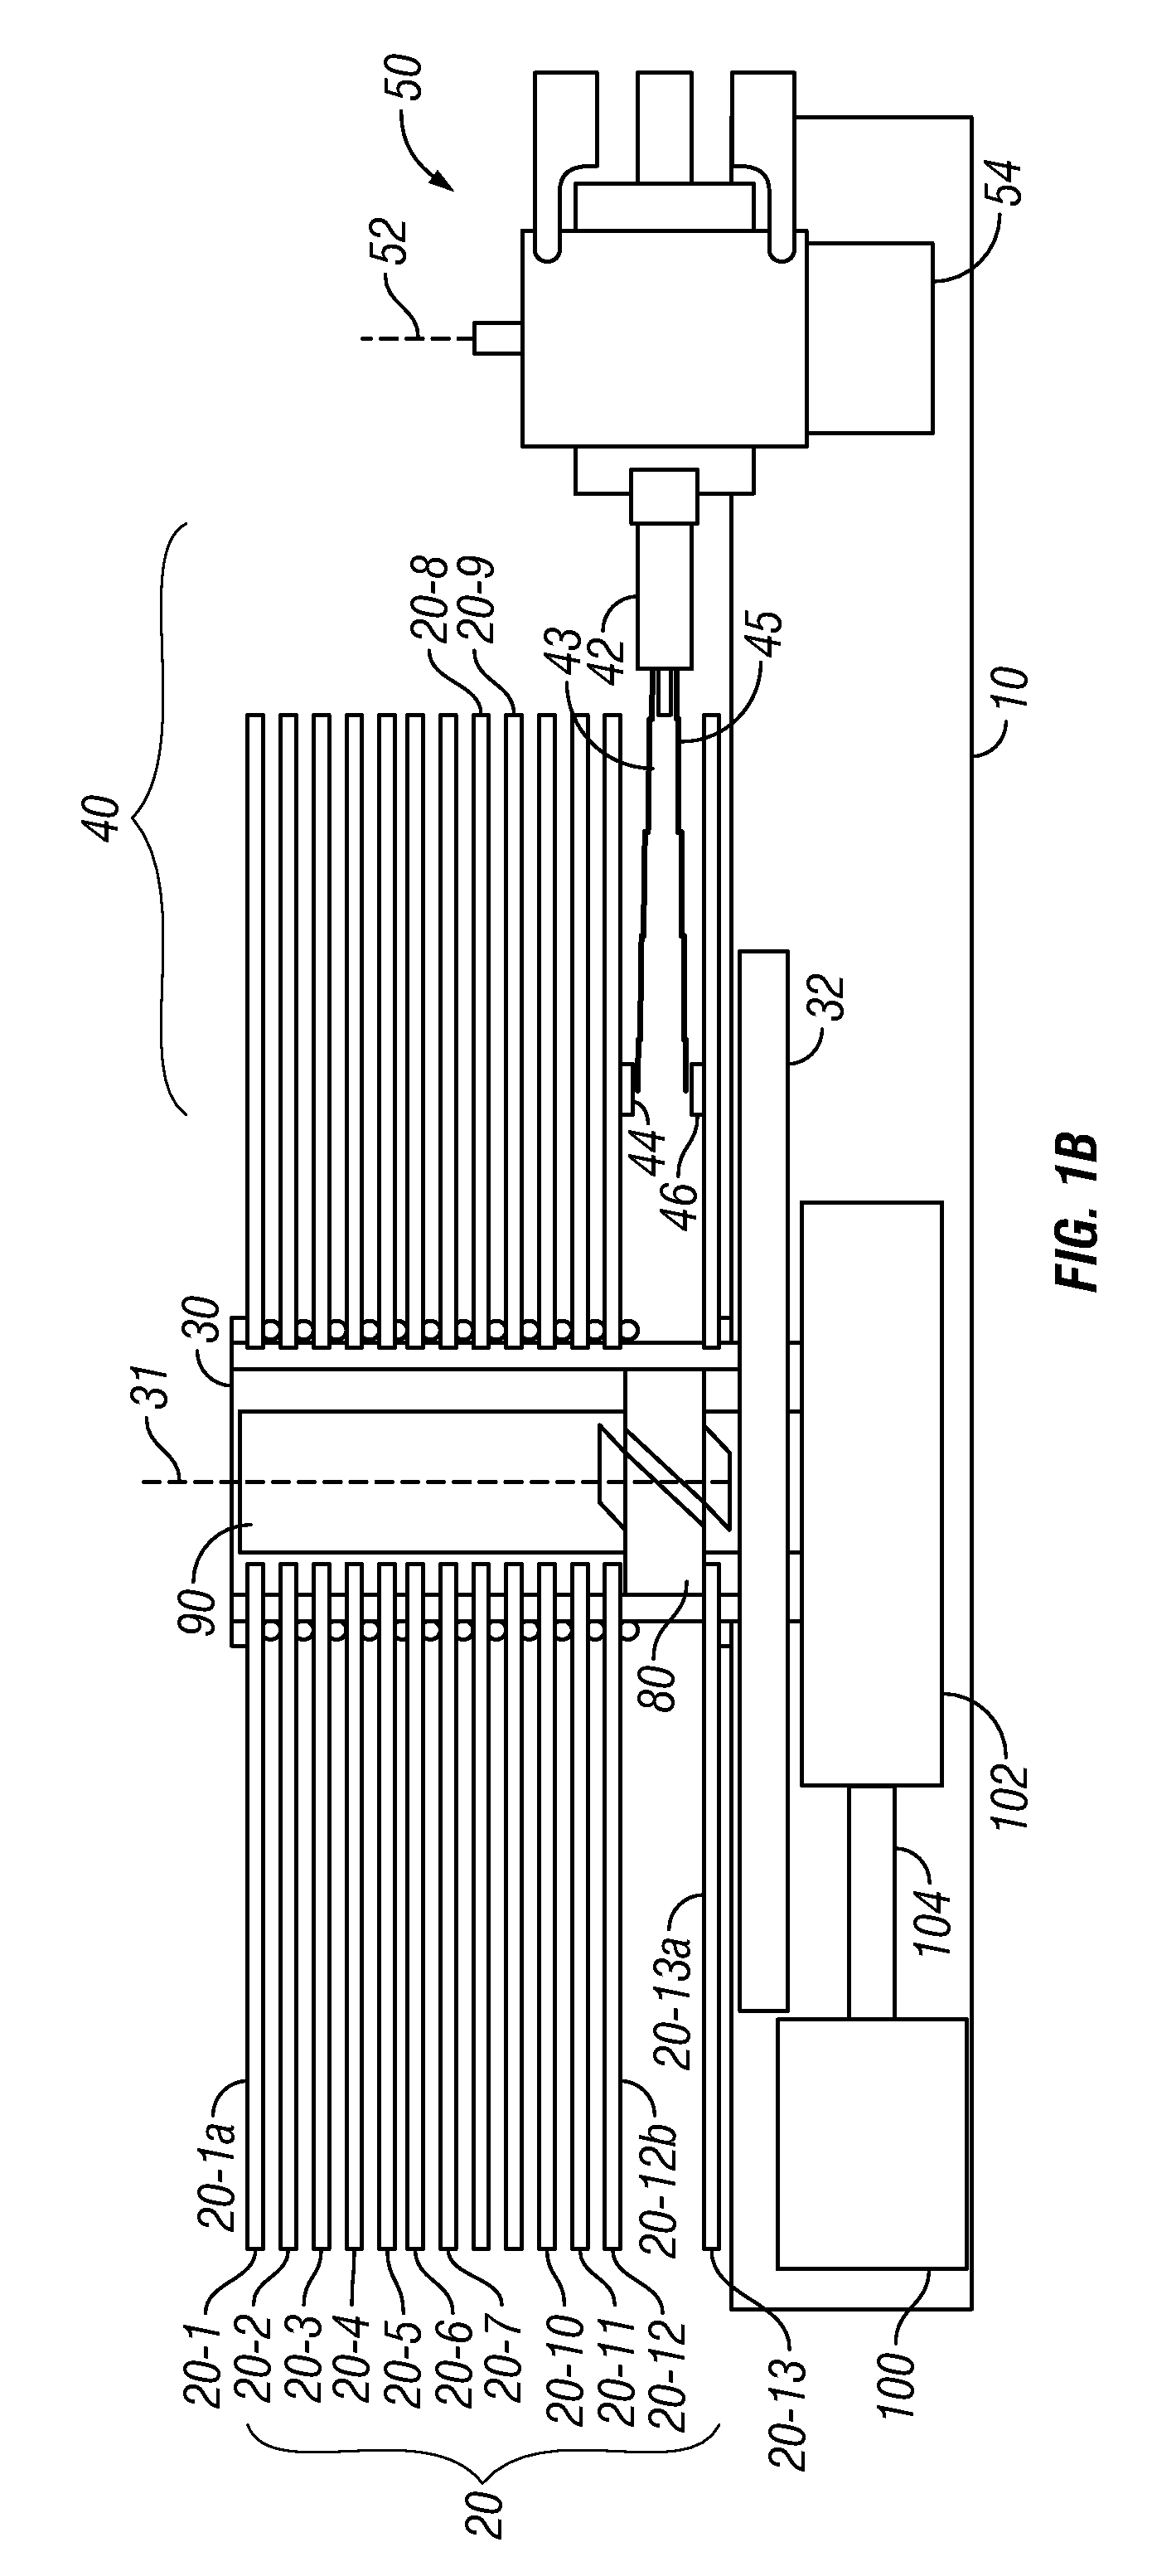 Disk drive having multiple disk surfaces accessible by a read/write head and nonvolatile memory for continuous data transfer